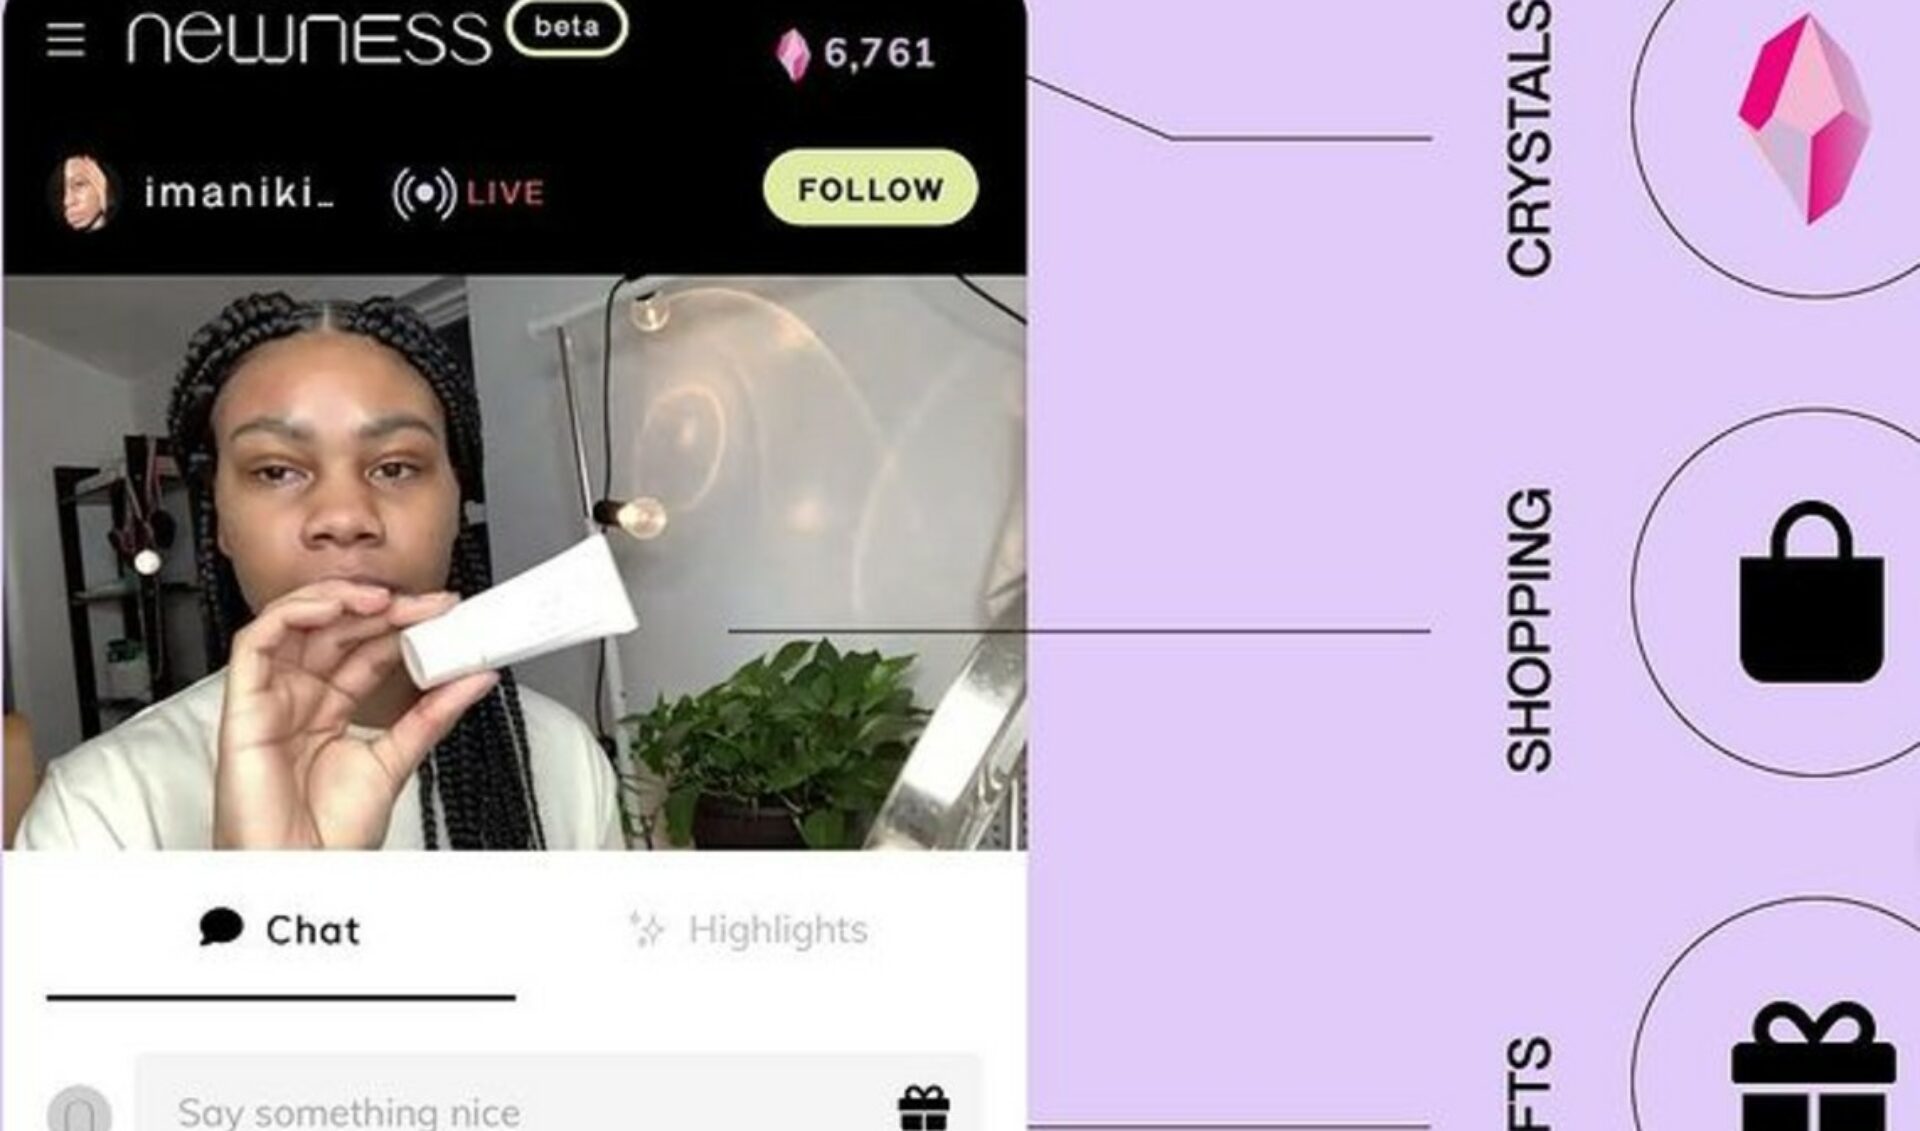 Ex-Twitch Employees Raise $3.5 Million For Beauty-Focused Streaming Startup 'Newness' - Tubefilter